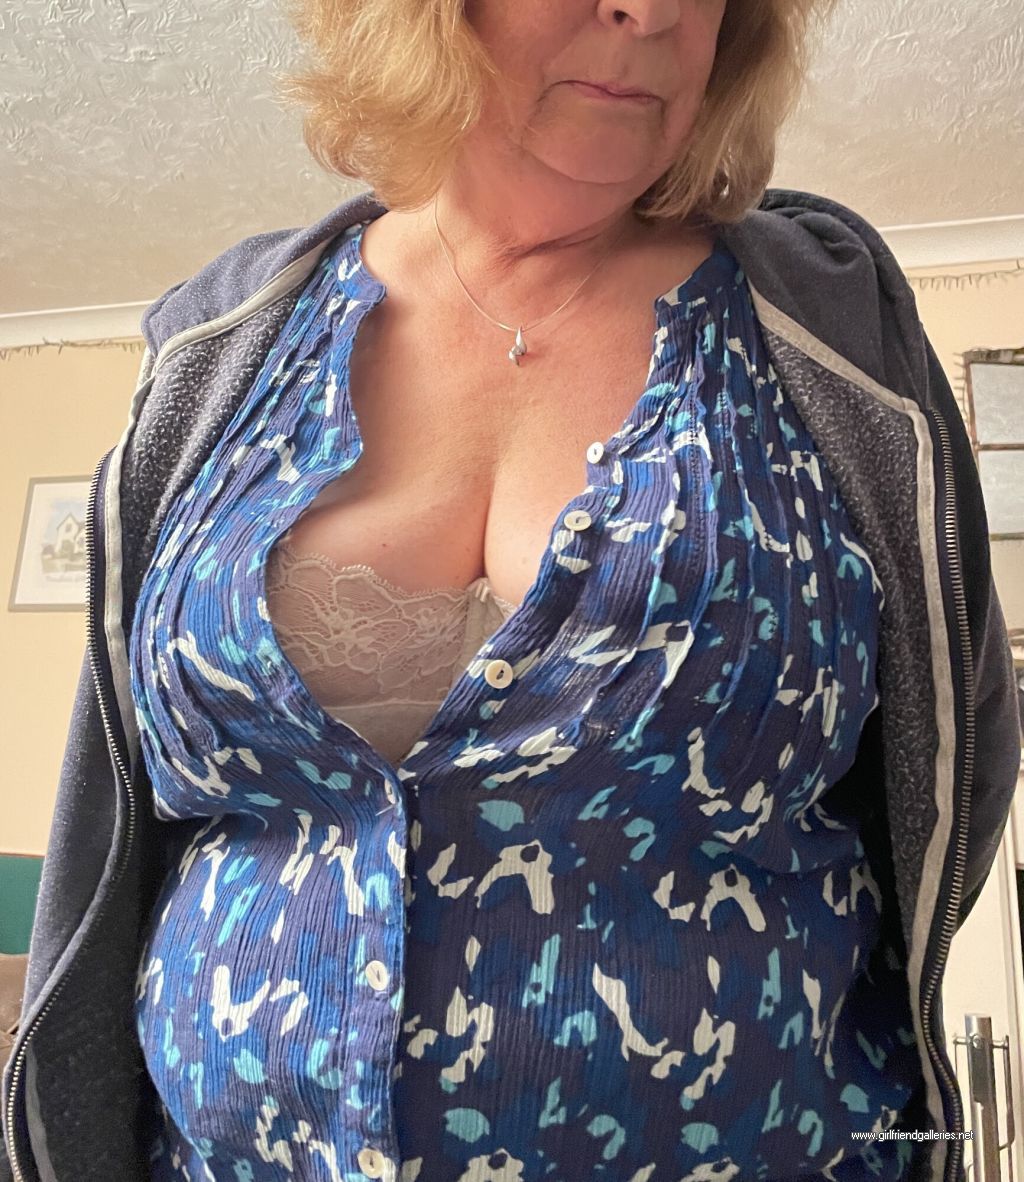 Mature wife